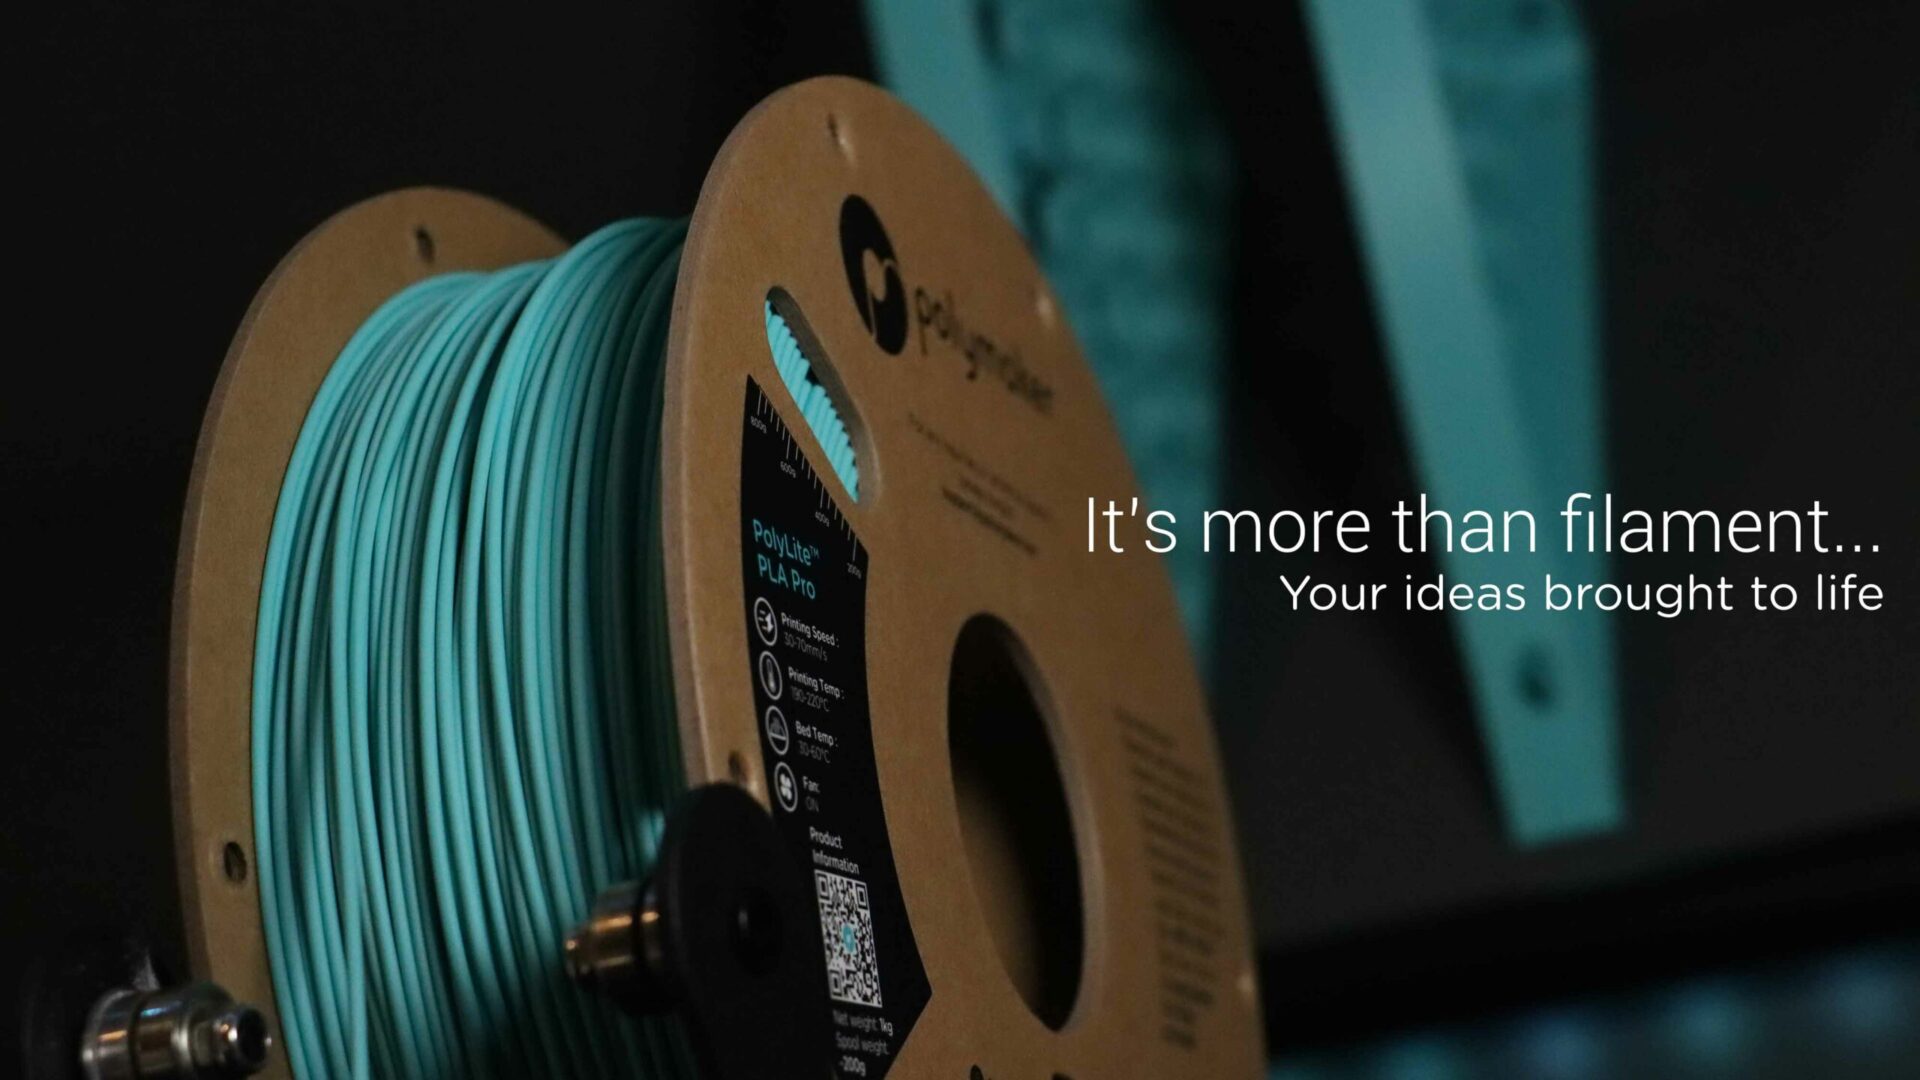 It's more than filament... Your ideas brought to life